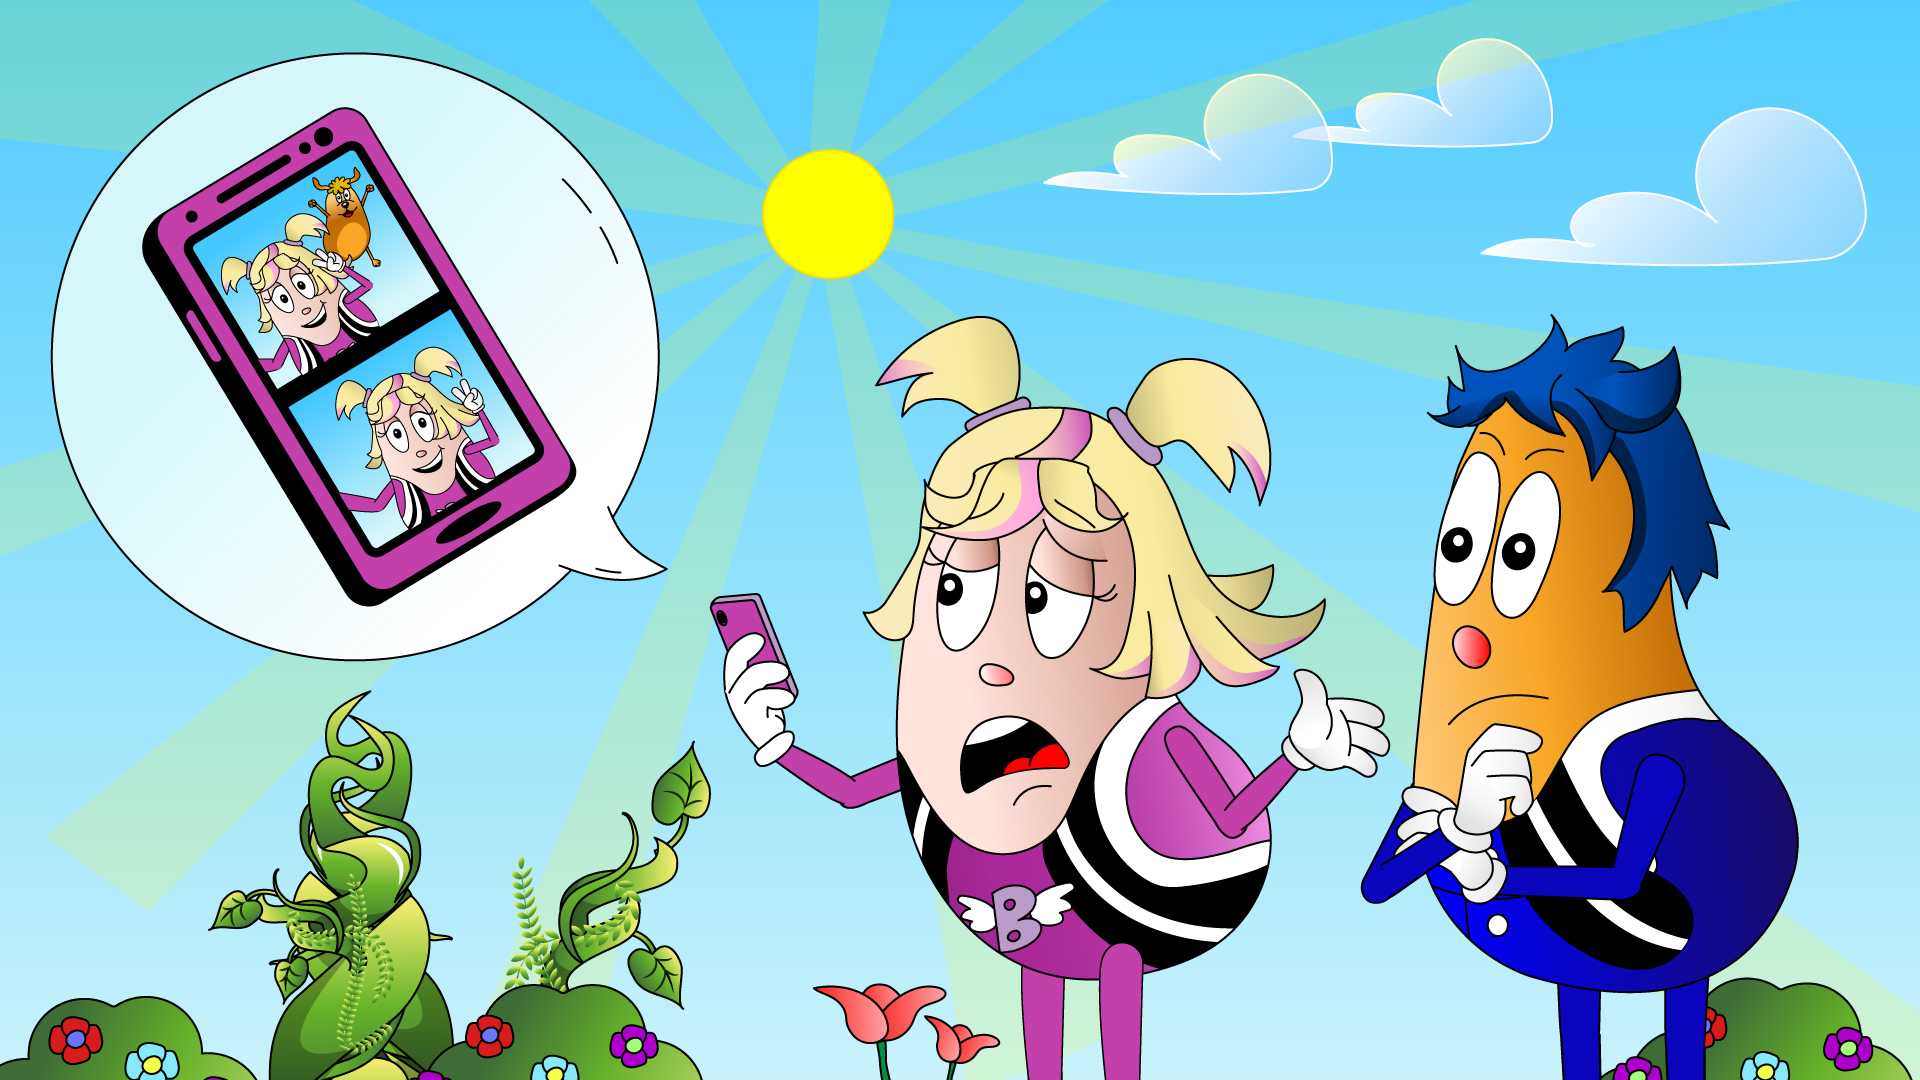 Posting a photo on the Internet is an animated video with educational subtext - phone down